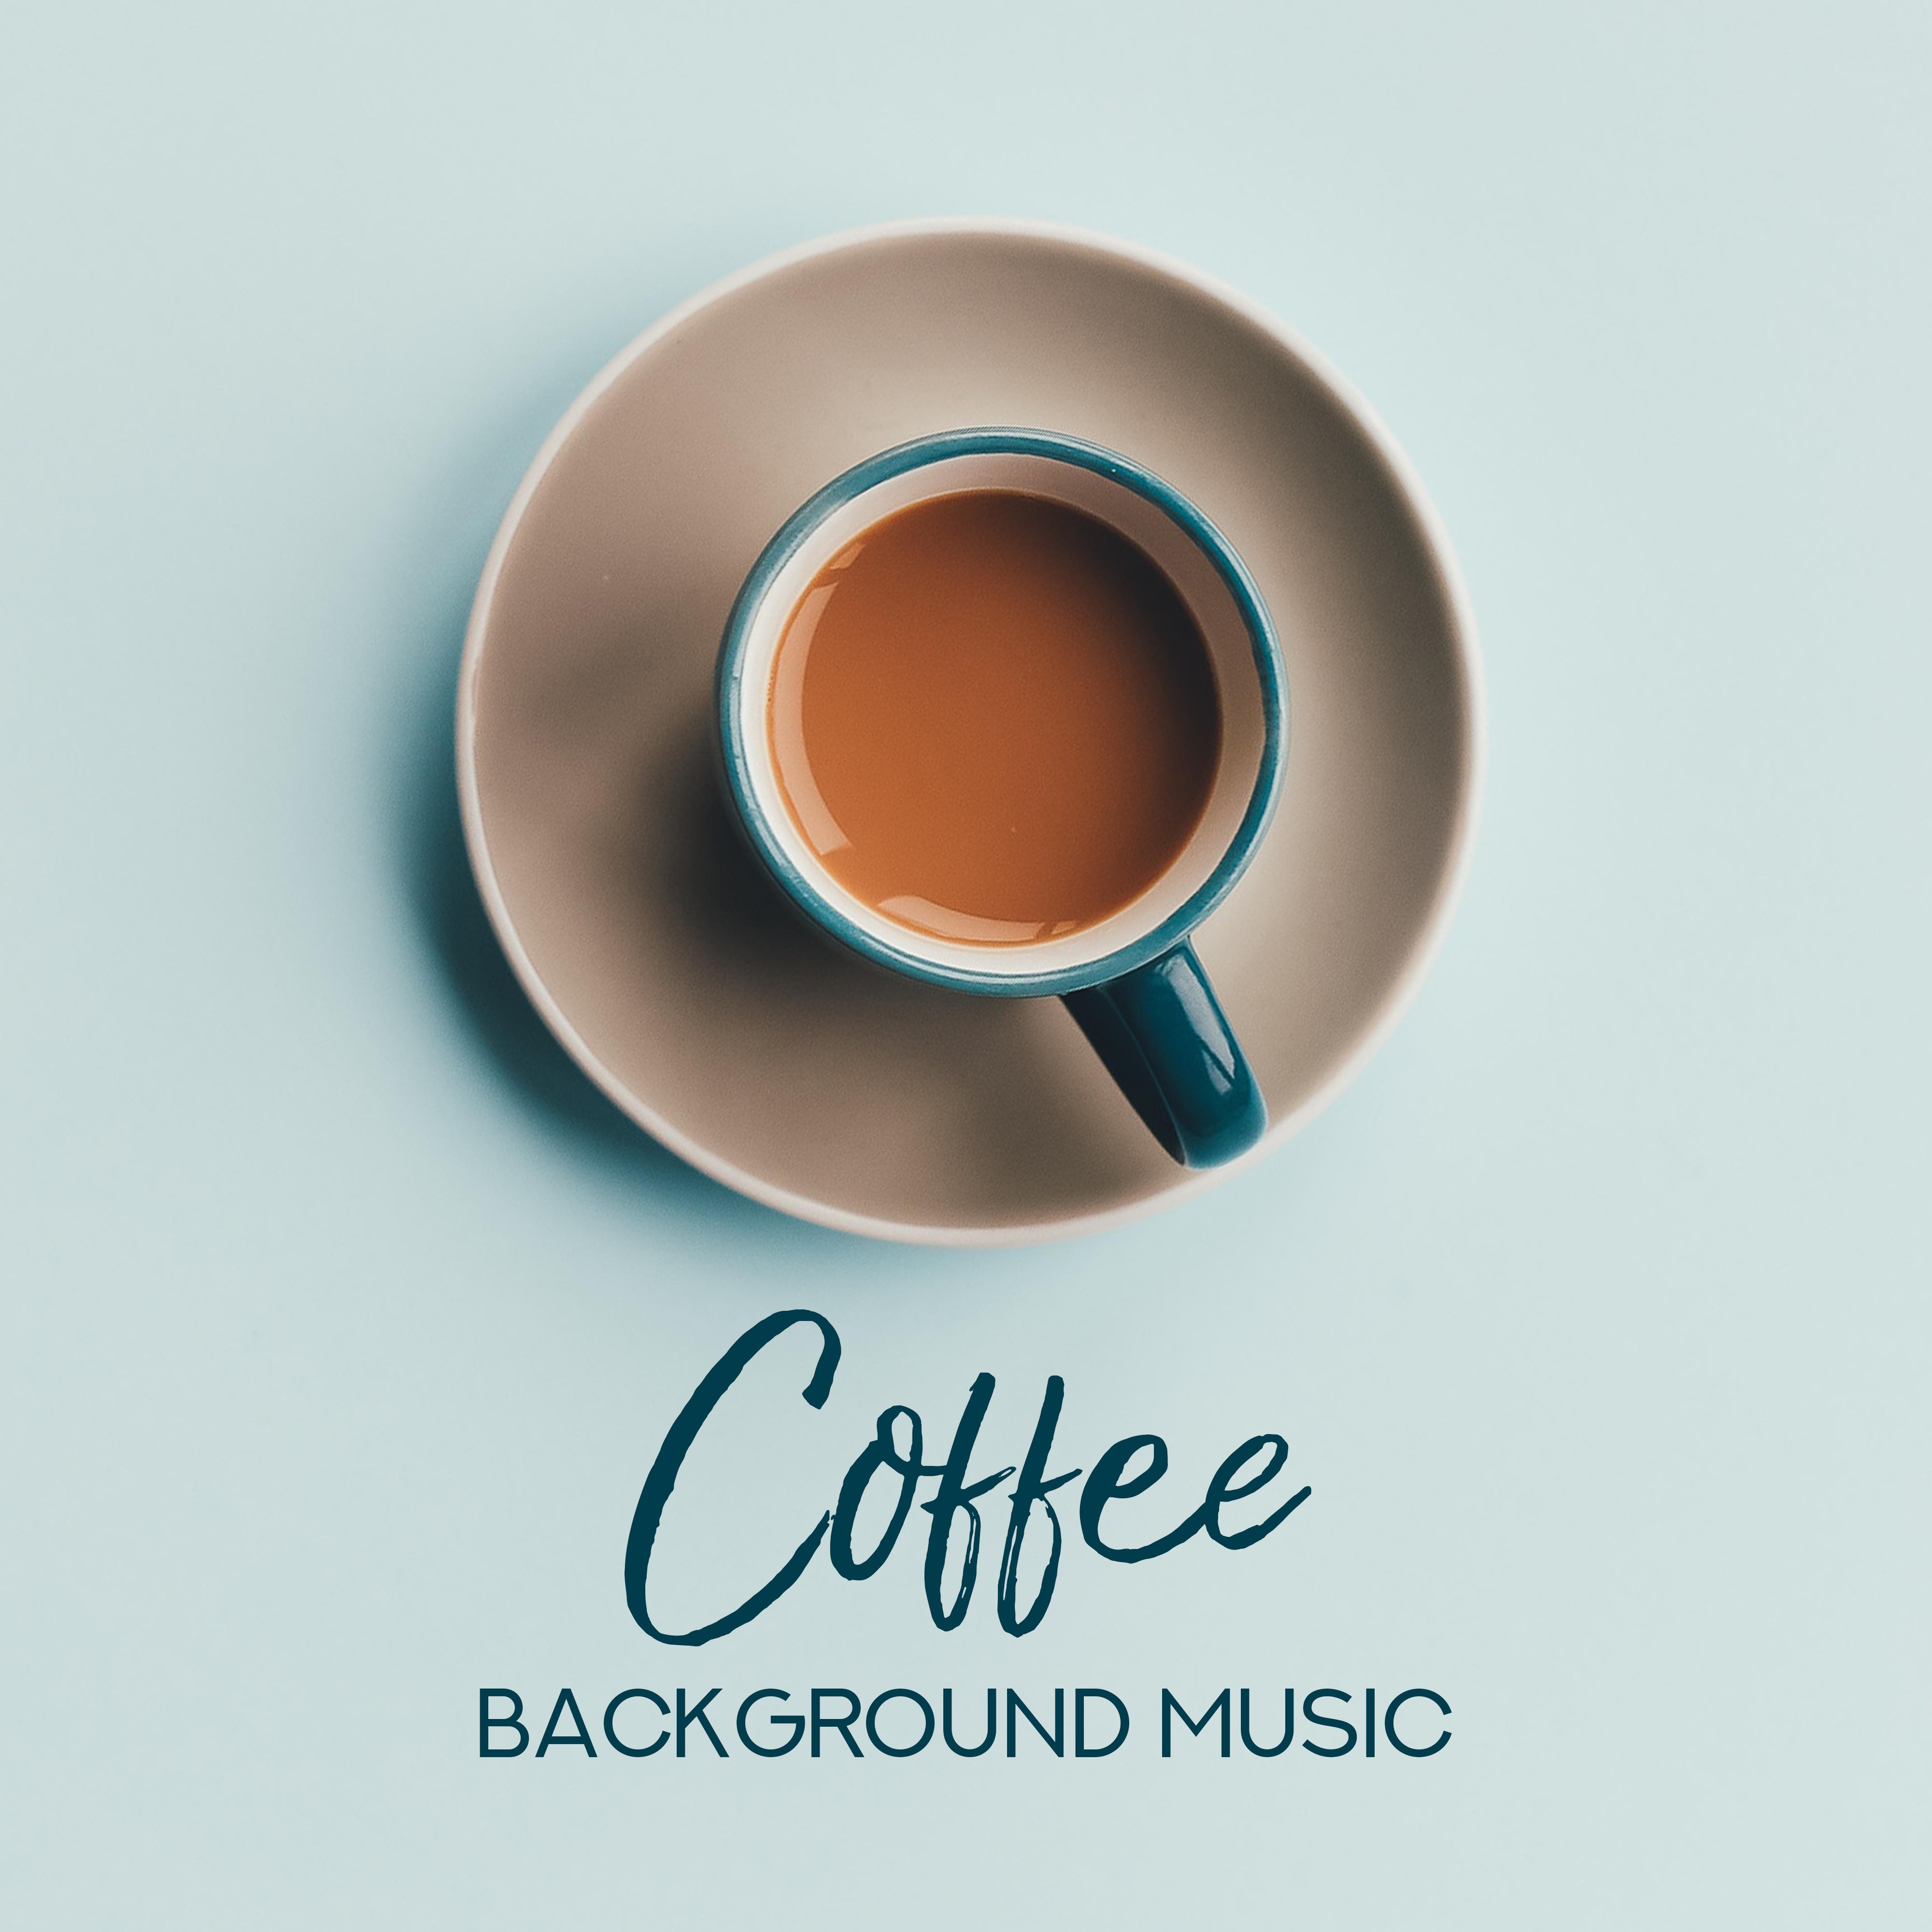 Coffee Background Music: 15 Jazz Tracks for a Cup of Your Favorite Coffee